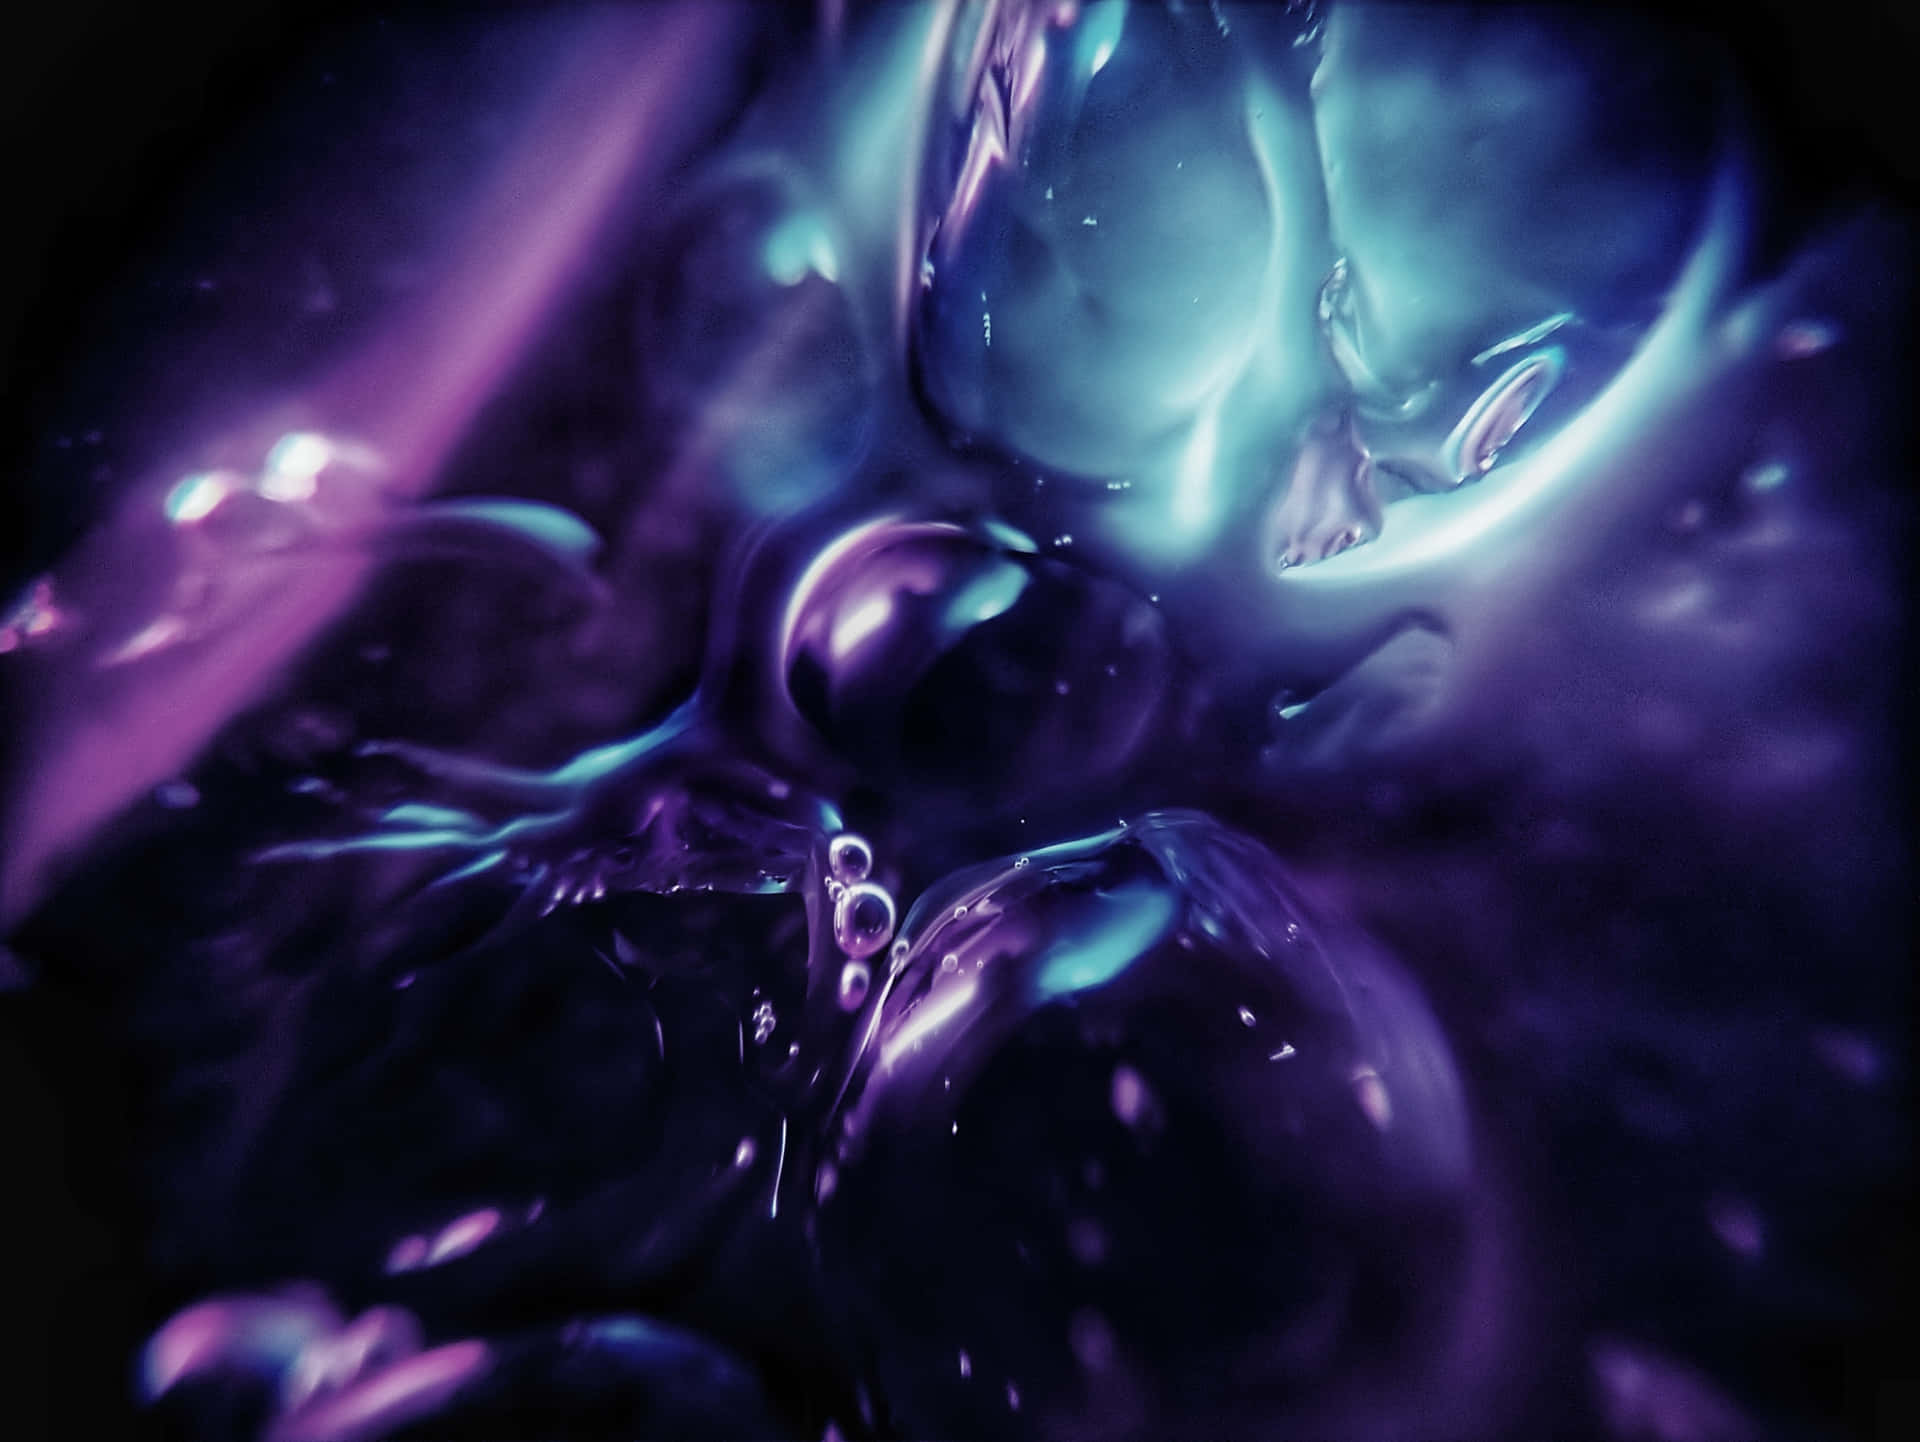 A Purple And Blue Image Of A Creature Background